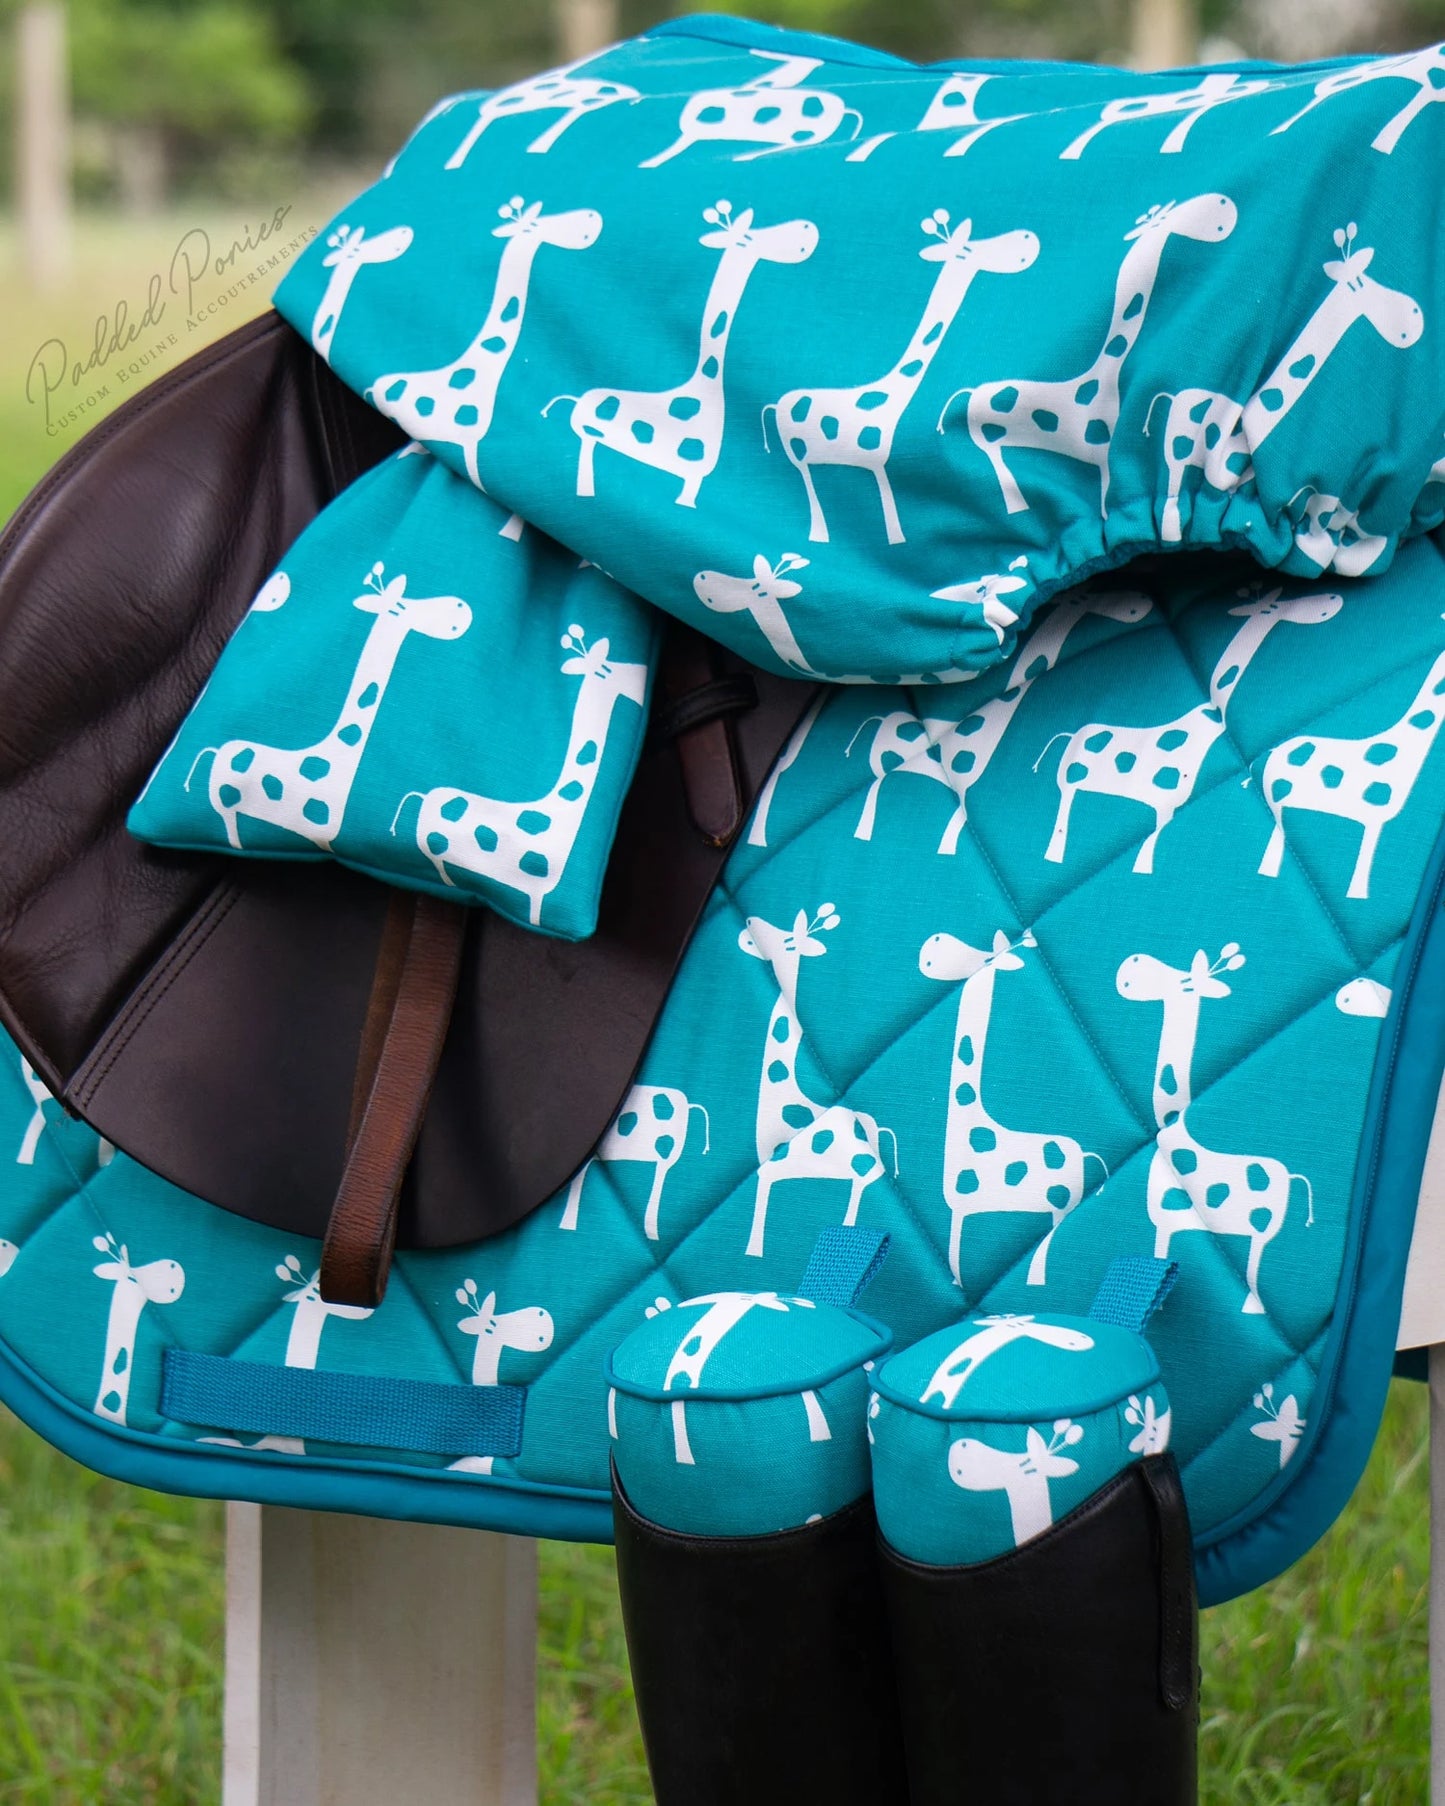 Turquoise Teal Giraffes Animal Print All Purpose Saddle Pad with Matching Boot Trees, Saddle Cover, and Stirrup Covers